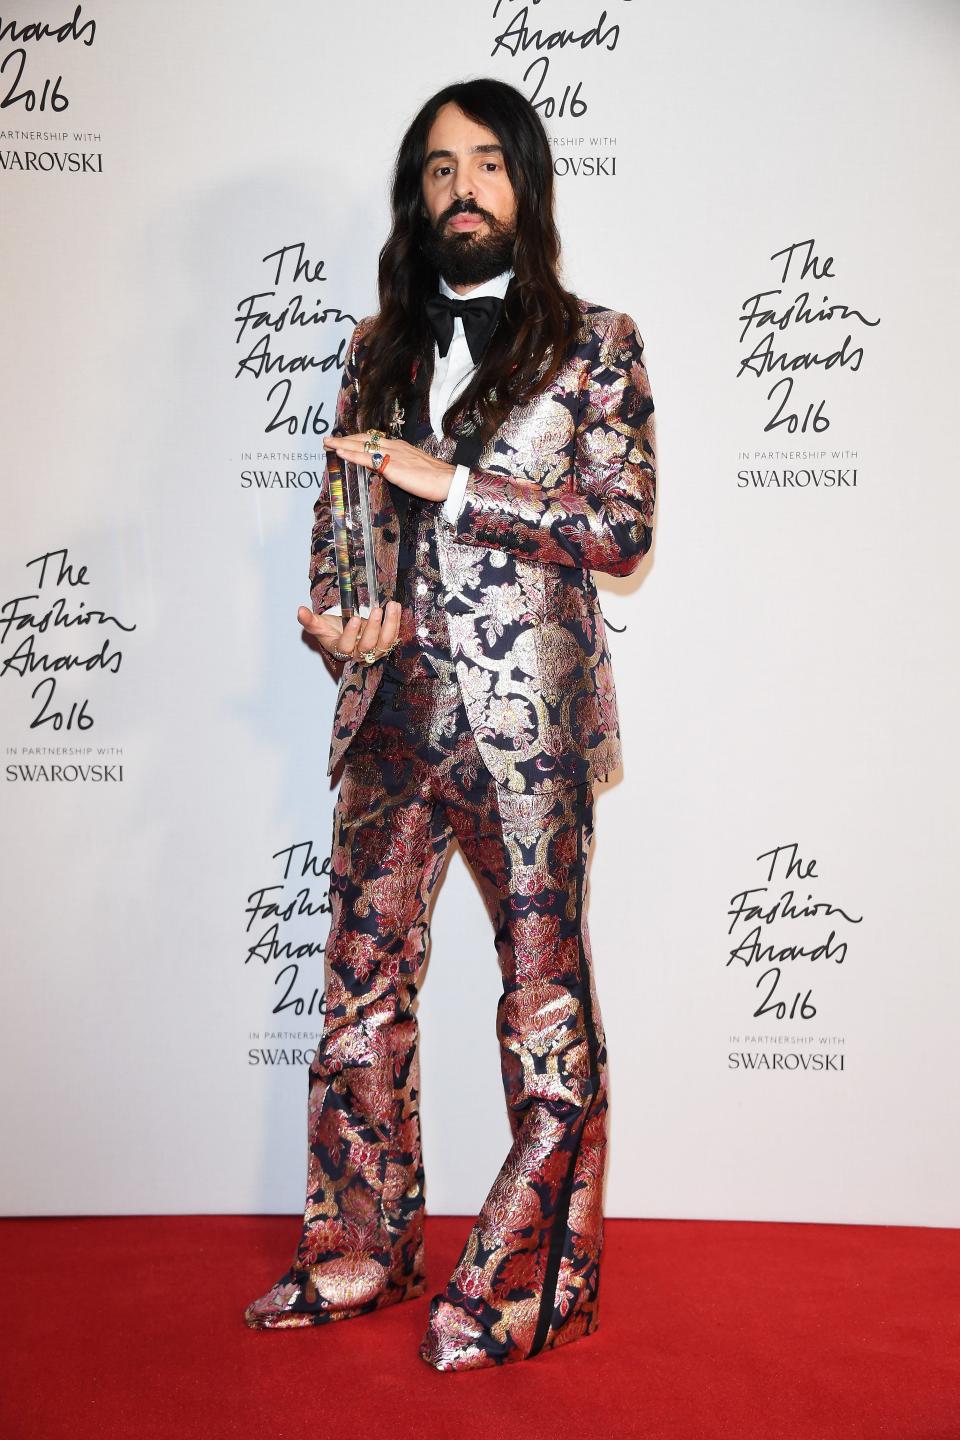 Gucci Creative Director Alessandro Michele in the Winners Room with his award for best International Accessories Designer at the British Fashion Awards 2016 on December 5, 2016 in London, England. (Photo by Venturelli/Getty Images for GUCCI)